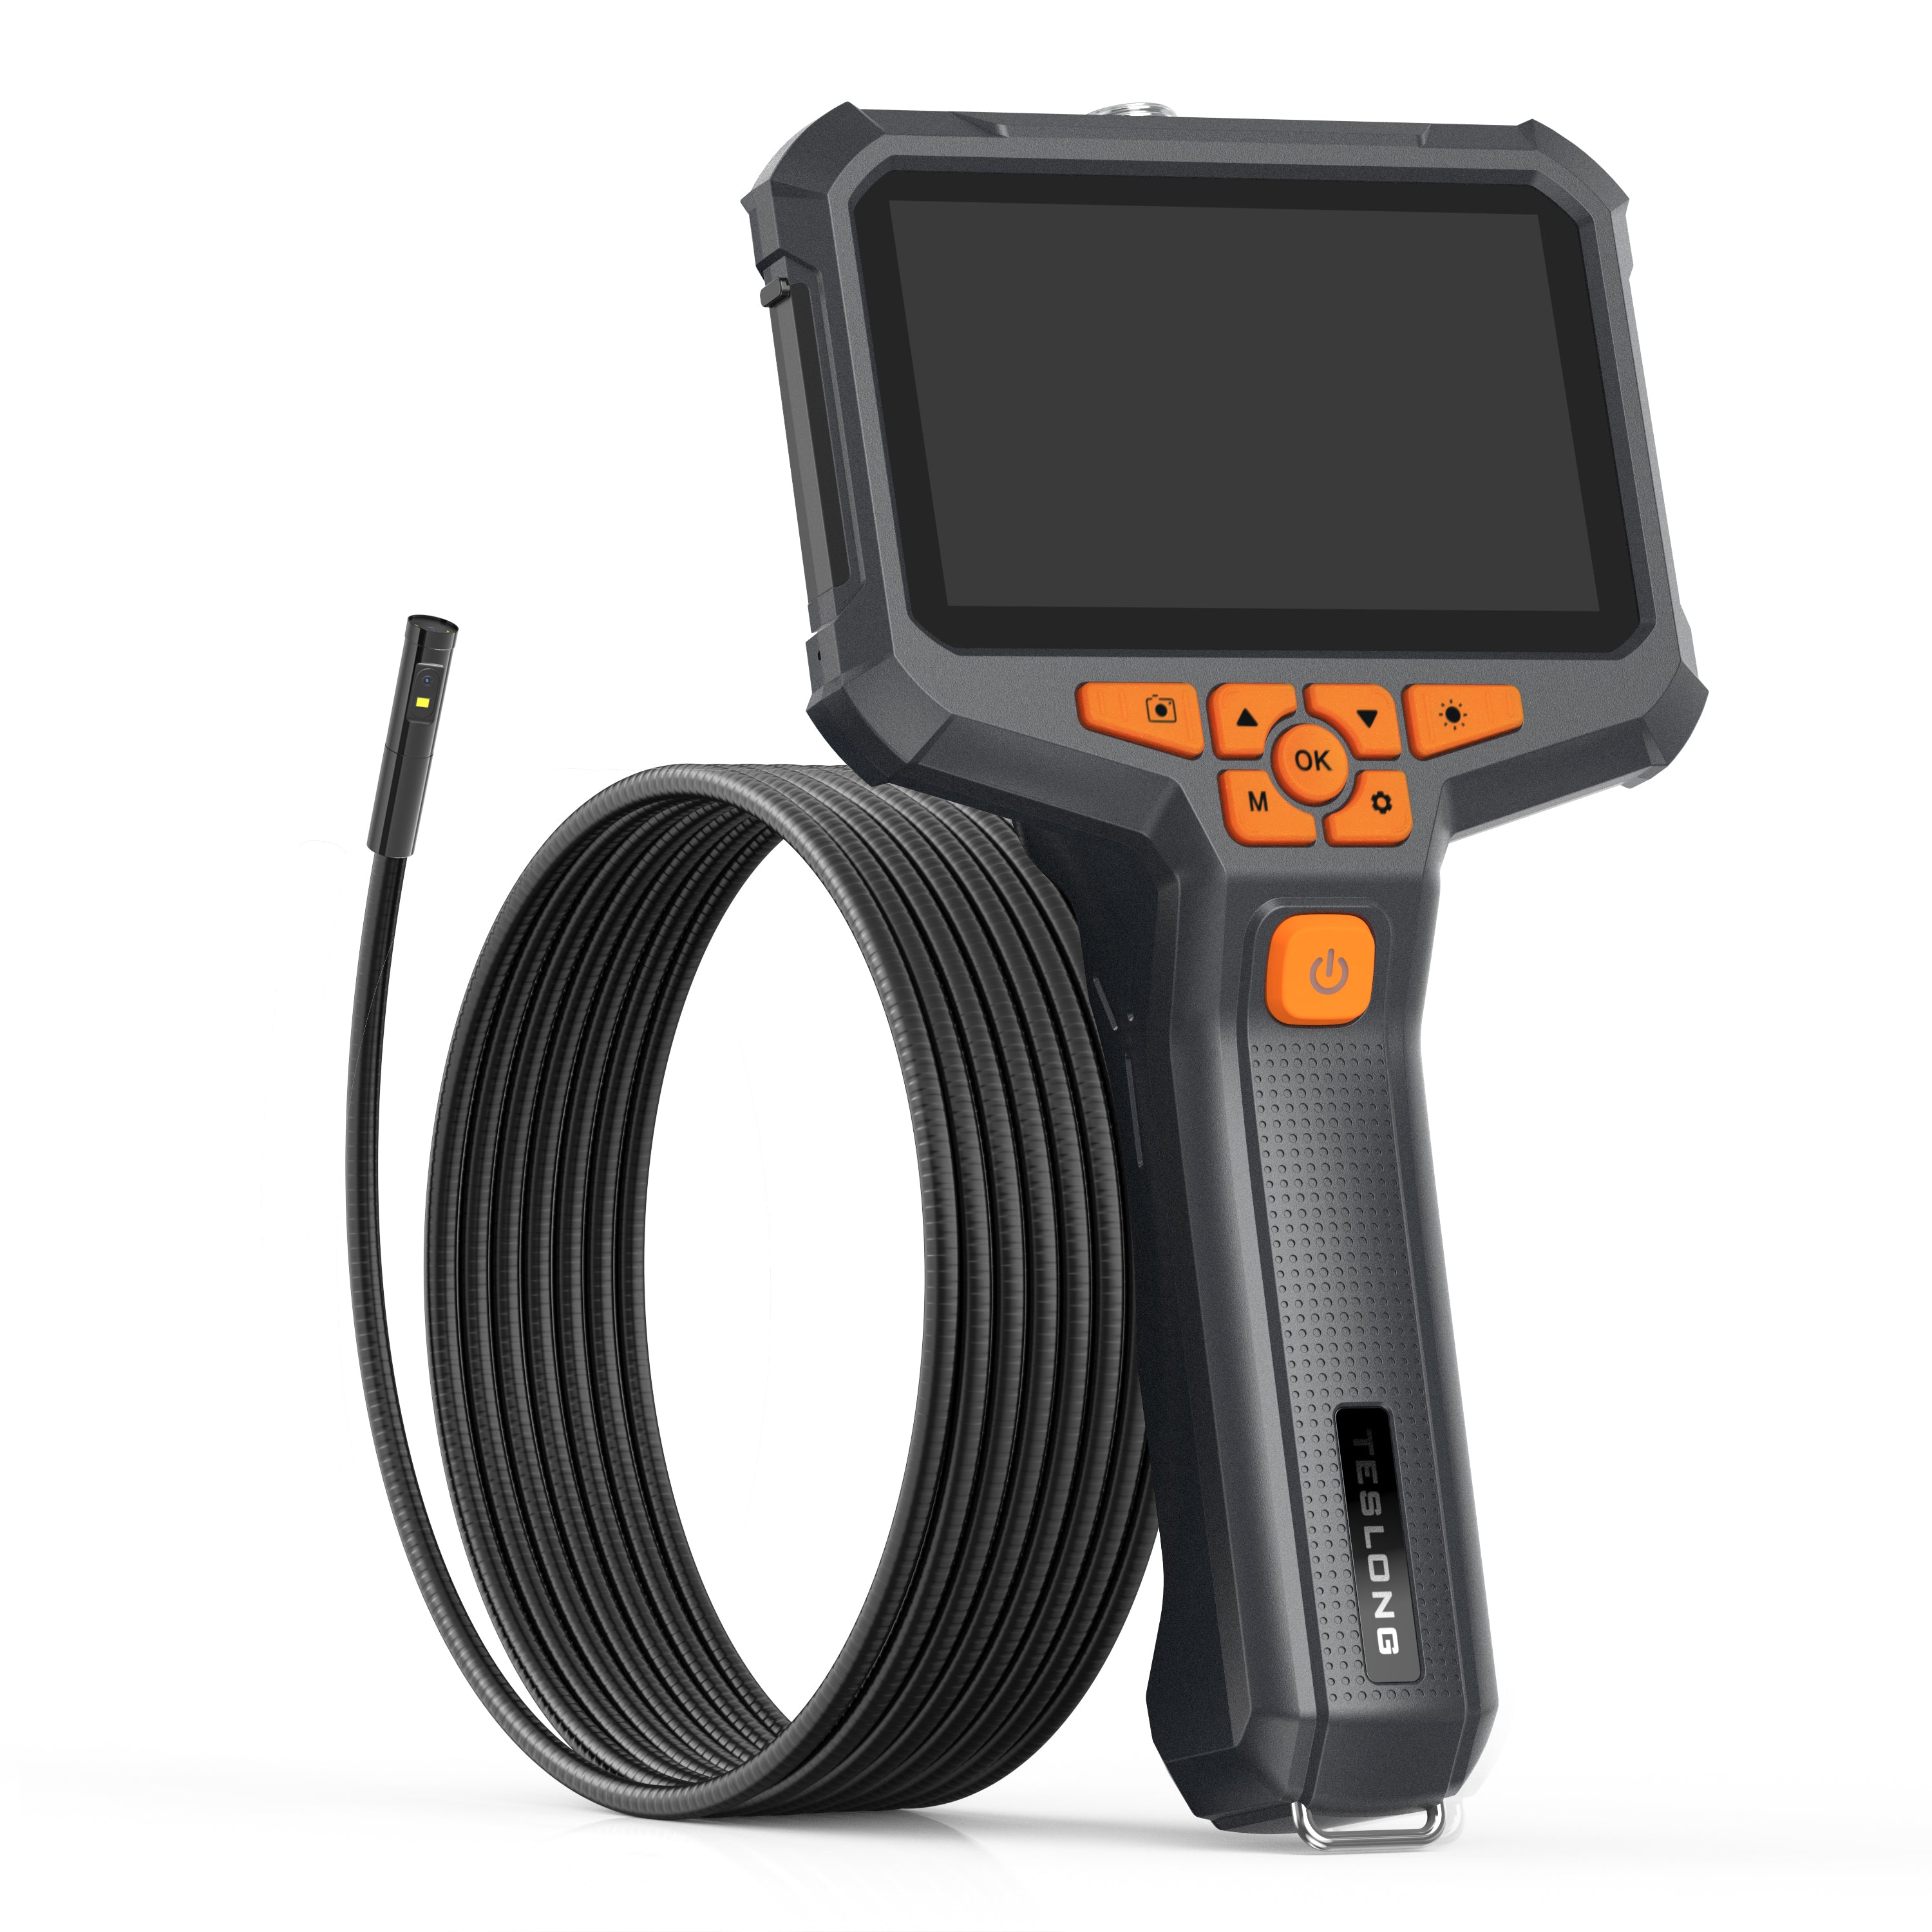 Triple Lens Endoscope with Light, Teslong NTS500 Pro Borescope Inspection  Camera with 5inch 720P HD Monitor, Industrial Mechanic Camera Scope, Fiber